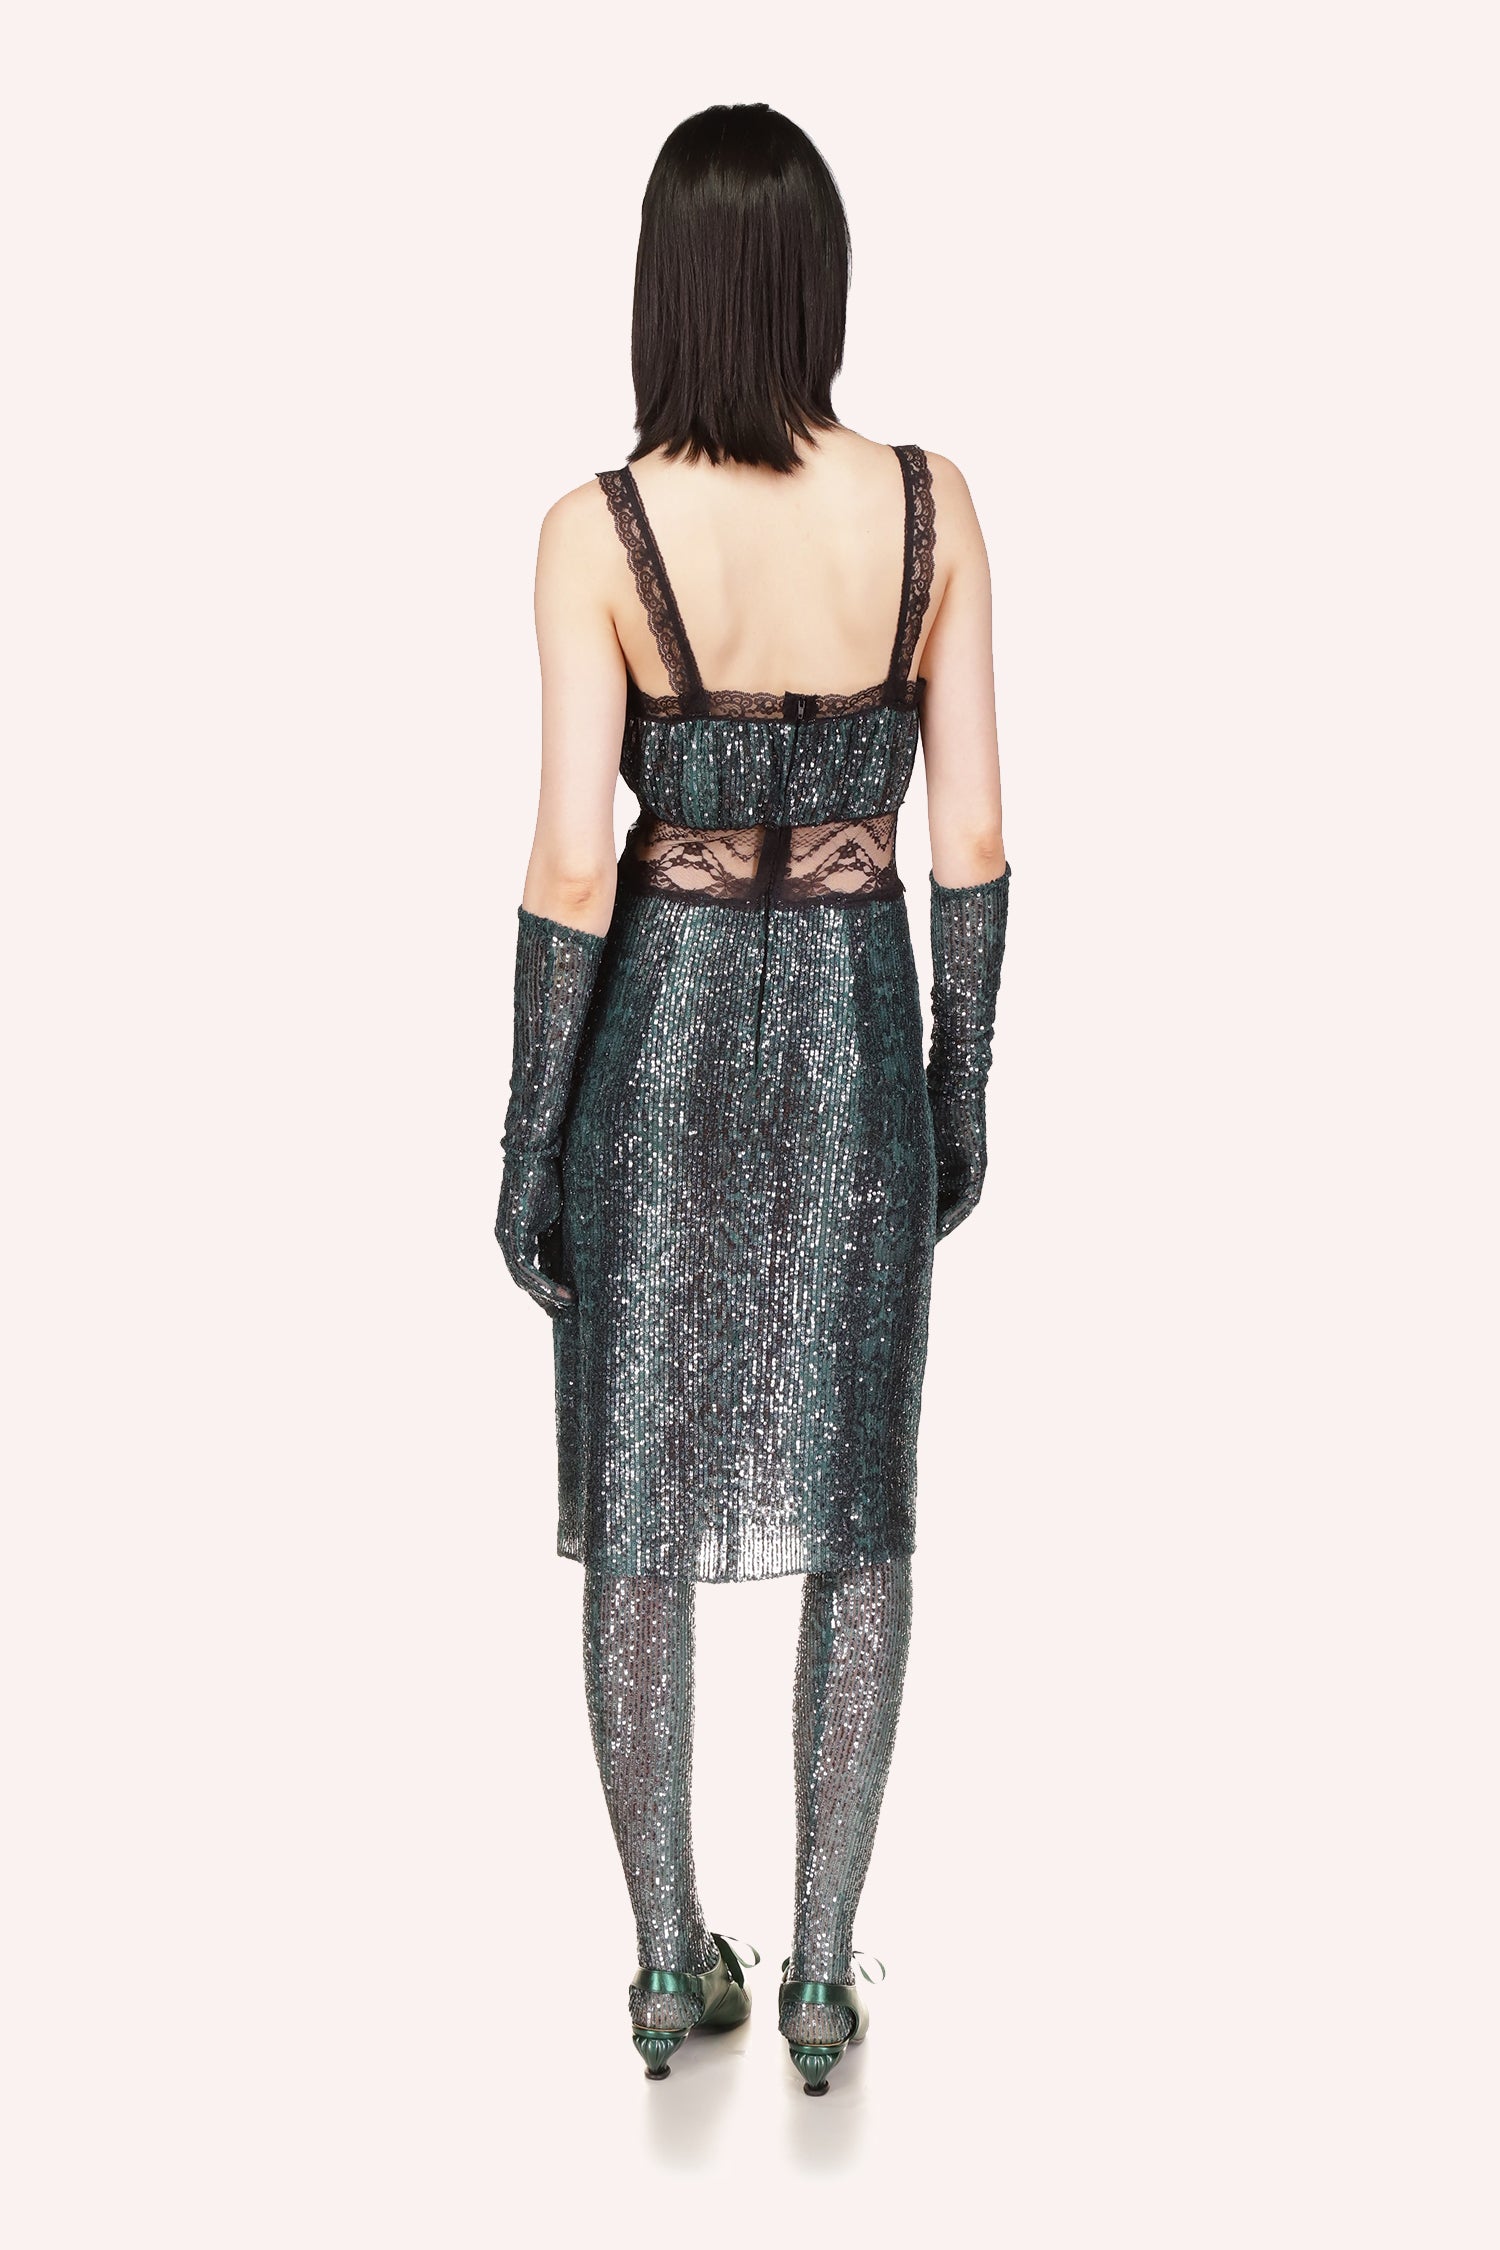 Knee-length dress, low-cut in the back, large waist see-through black lace, a zipper running from the top along spine